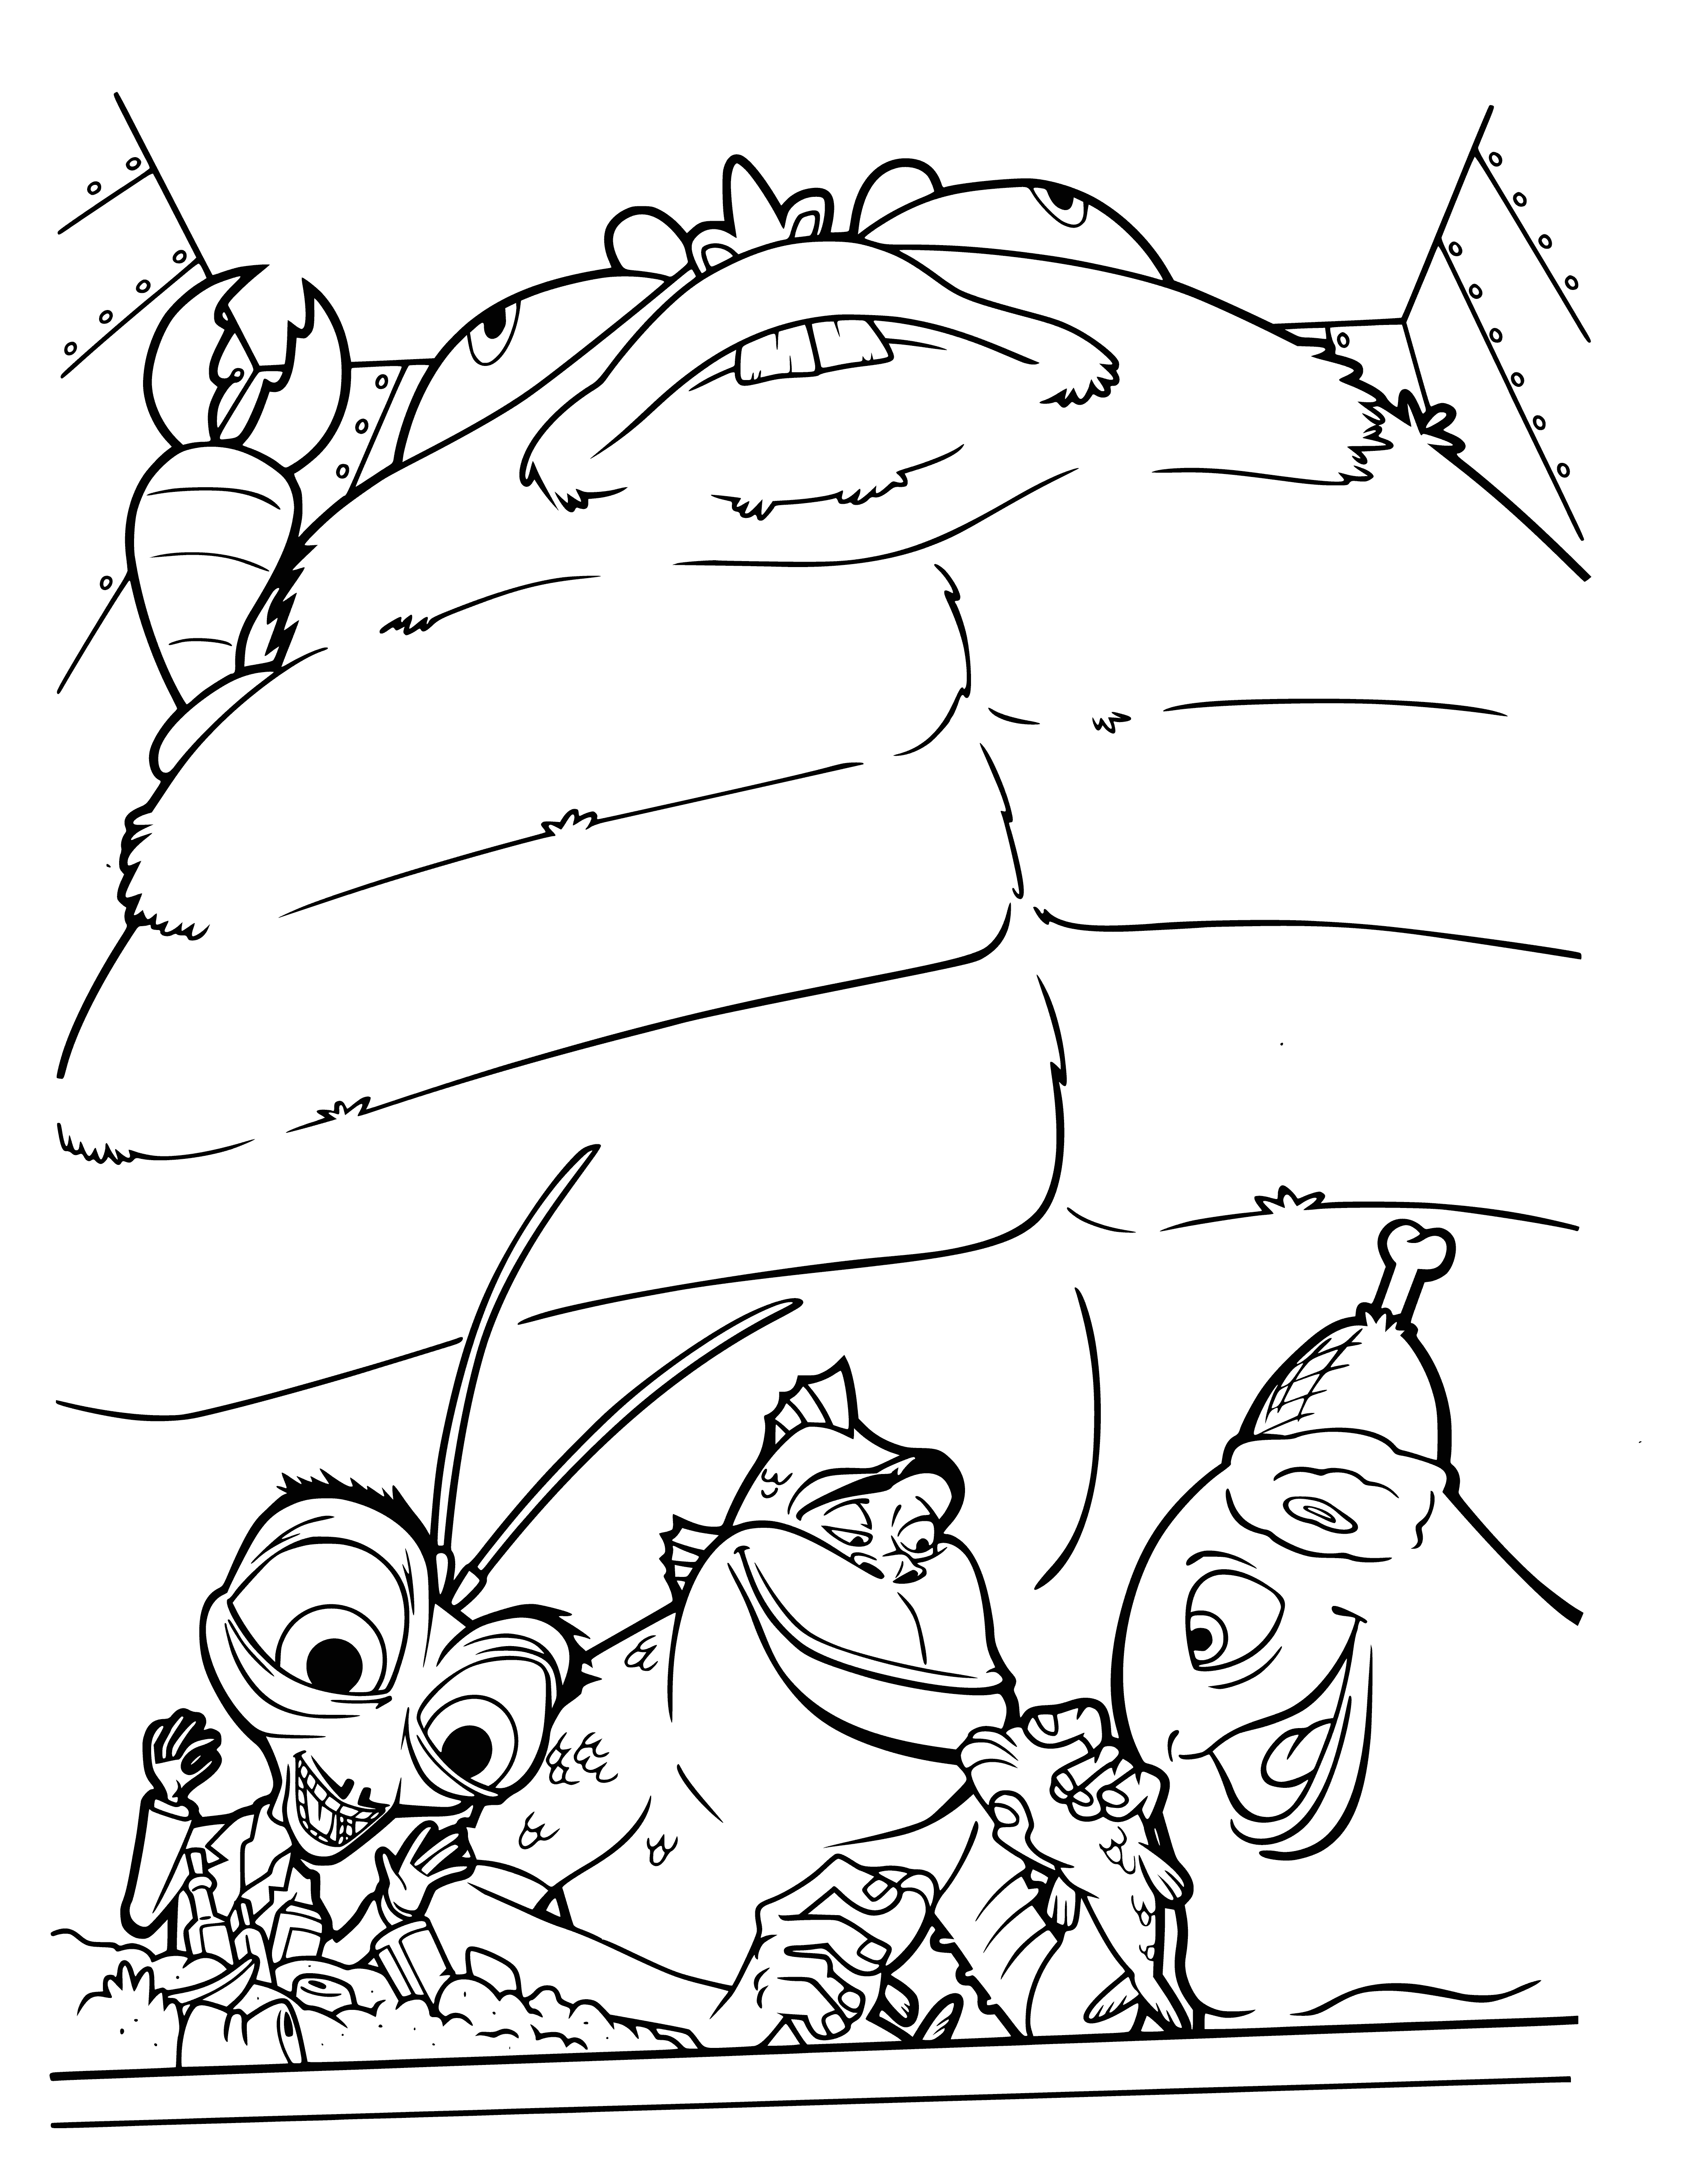 coloring page: Team led by General W.R. Monger (B.O.B., Insectosaurus, Missing Link, Ginormica) battle aliens/monsters threatening Earth using unique skills.